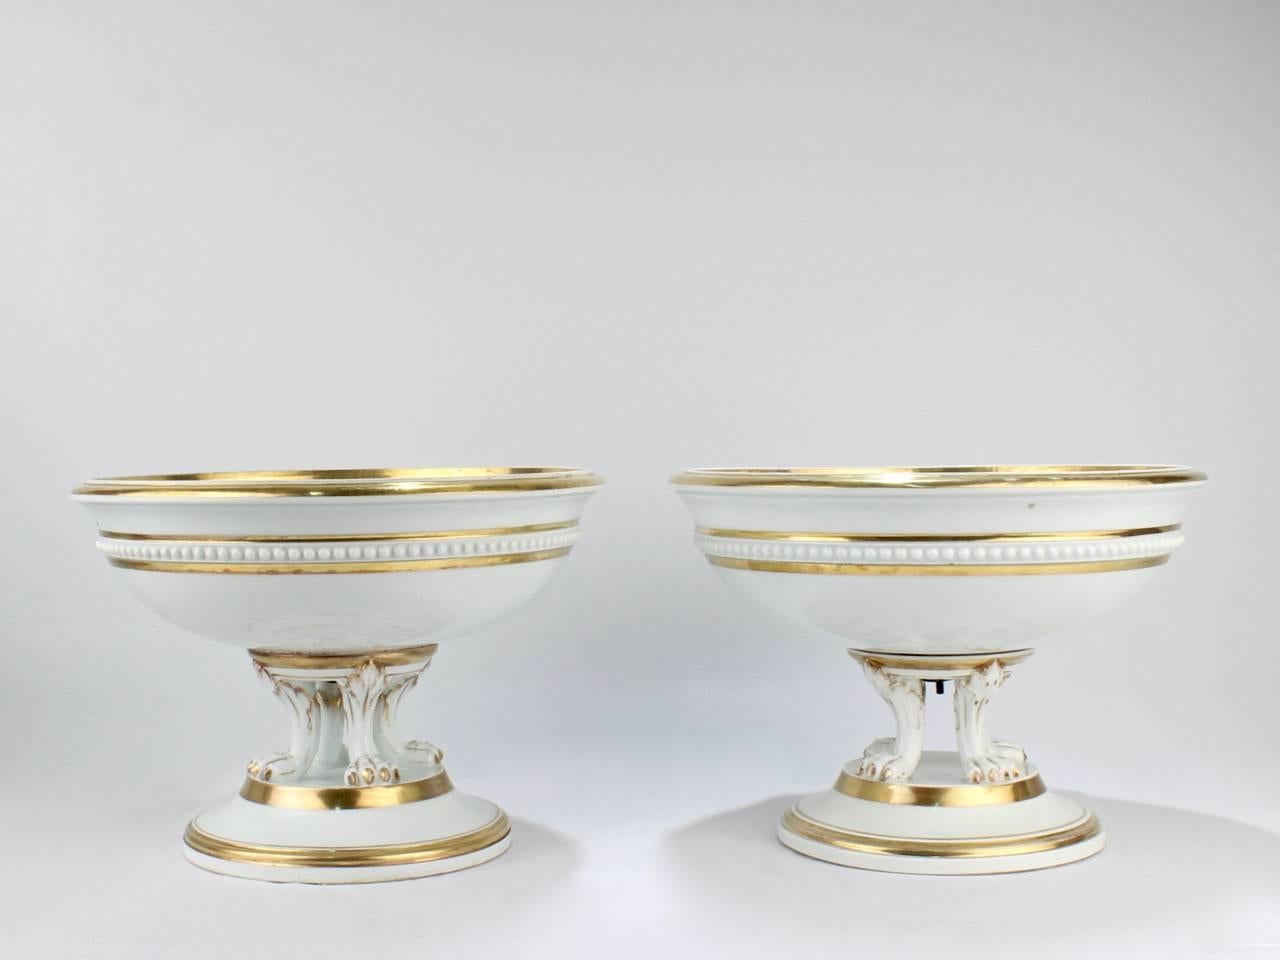 German Pair of Large Antique Meissen Porcelain Topographical Footed Bowls or Tazzas